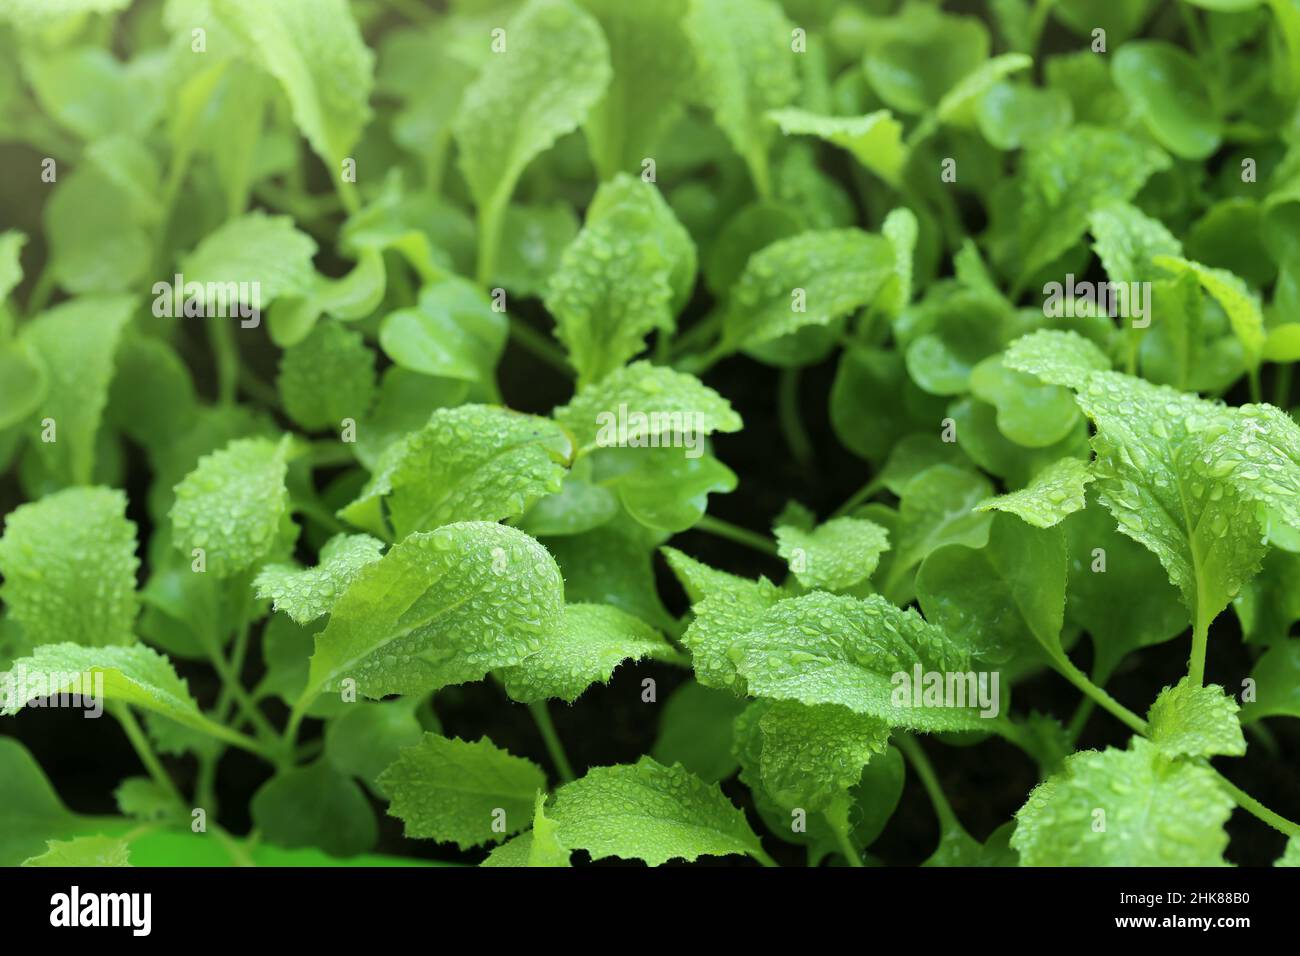 Microgreens in water drops. Chinese cabbage green sprouts. Cultivation of microgreens.Wating microgreens and seedlings Stock Photo